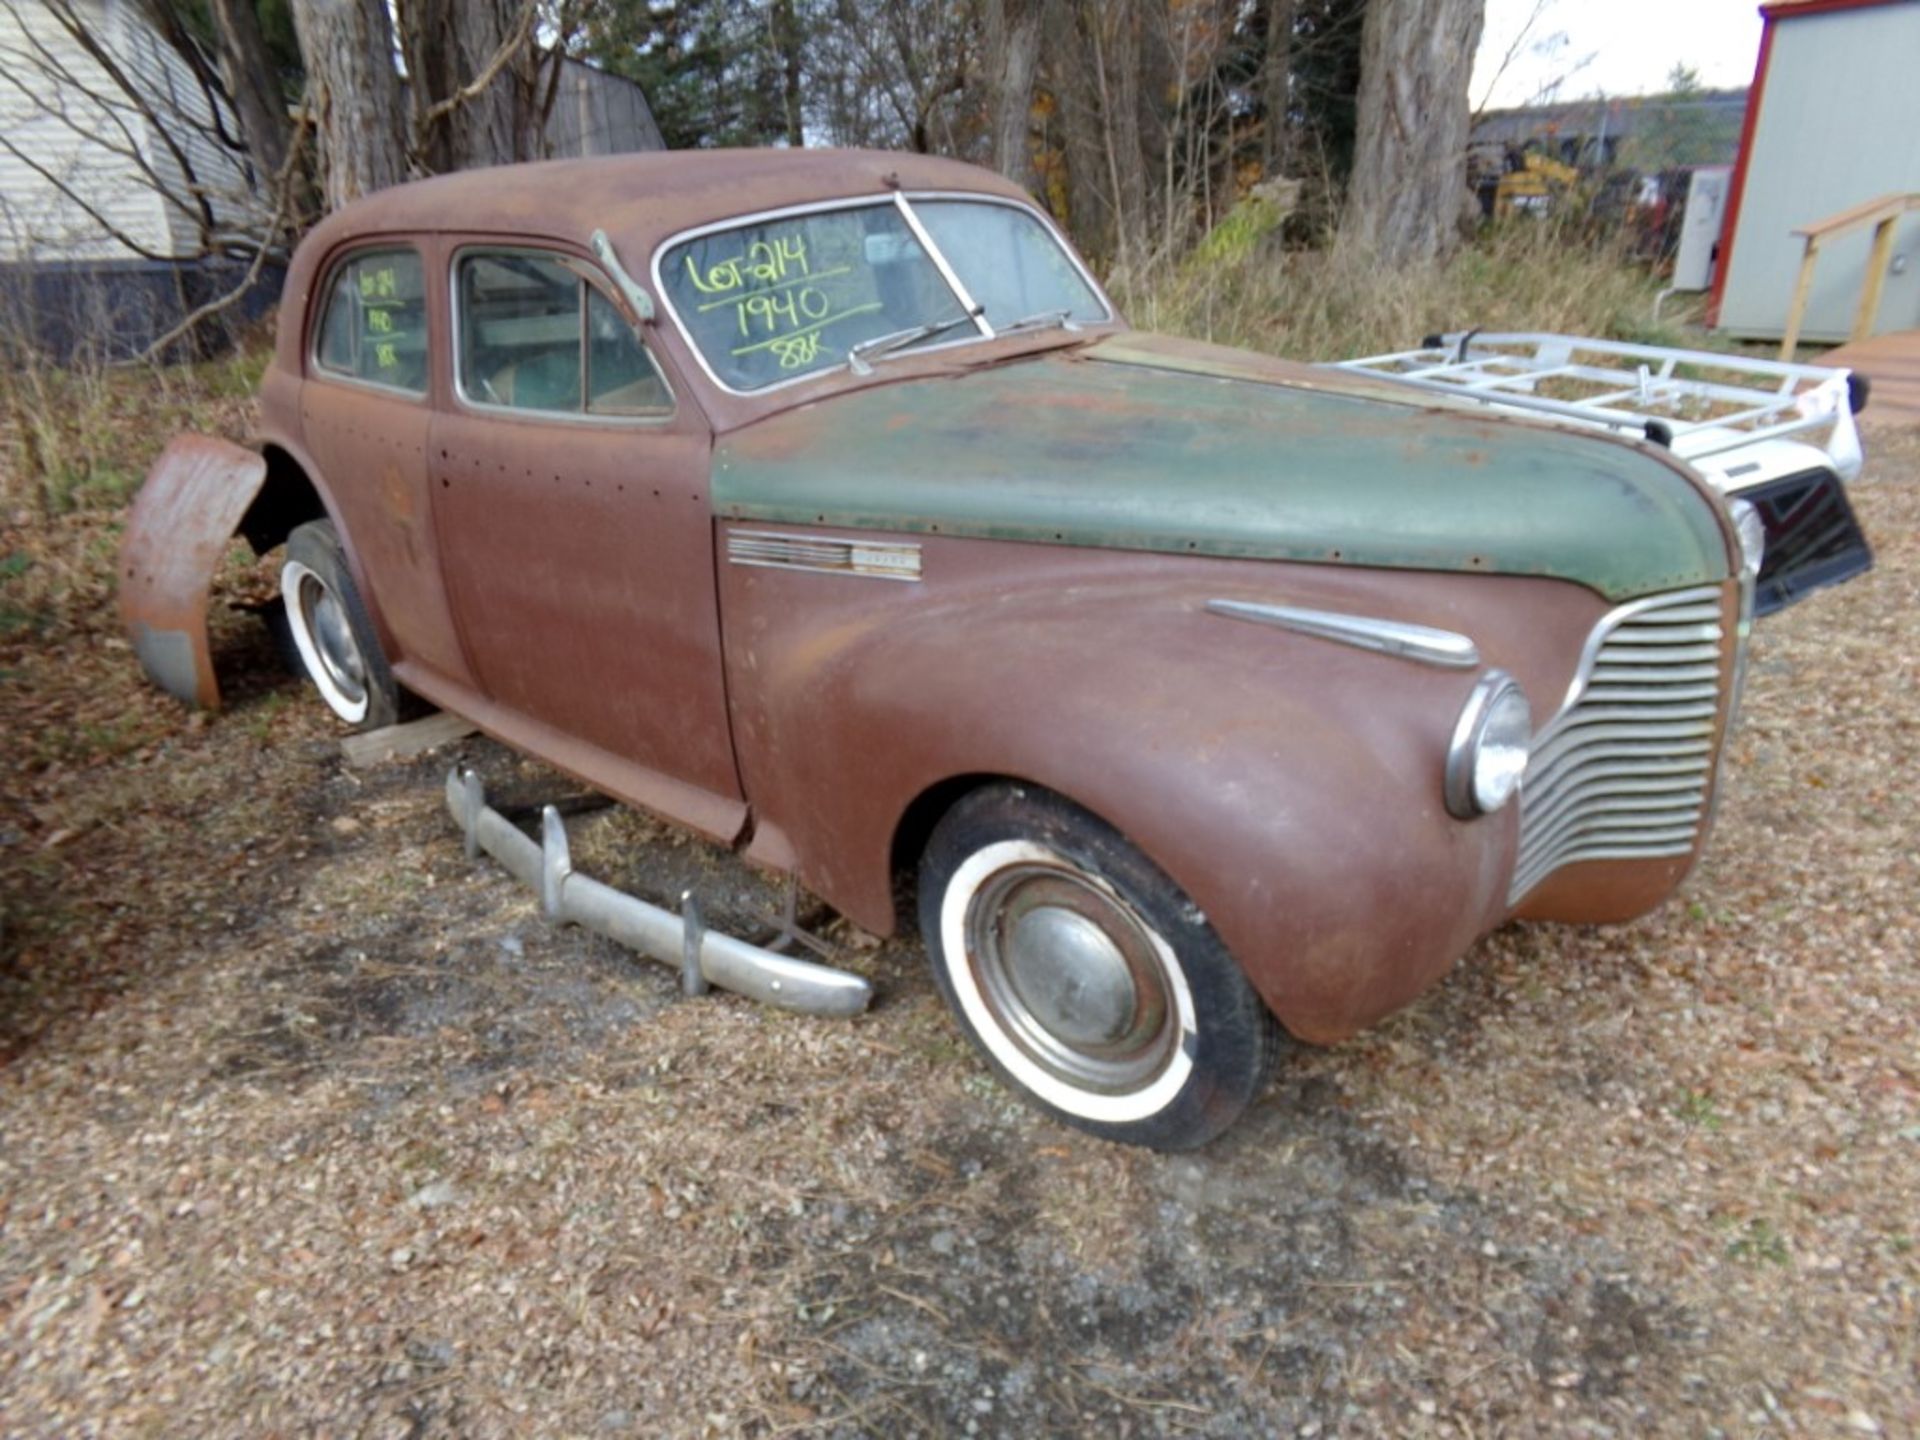 1940 Buick, Green, 88,325 Mi, Vin# 13821285 - HAS TRANSFERABLE REGISTRATION / OPEN TO ALL BUYERS - Image 5 of 5